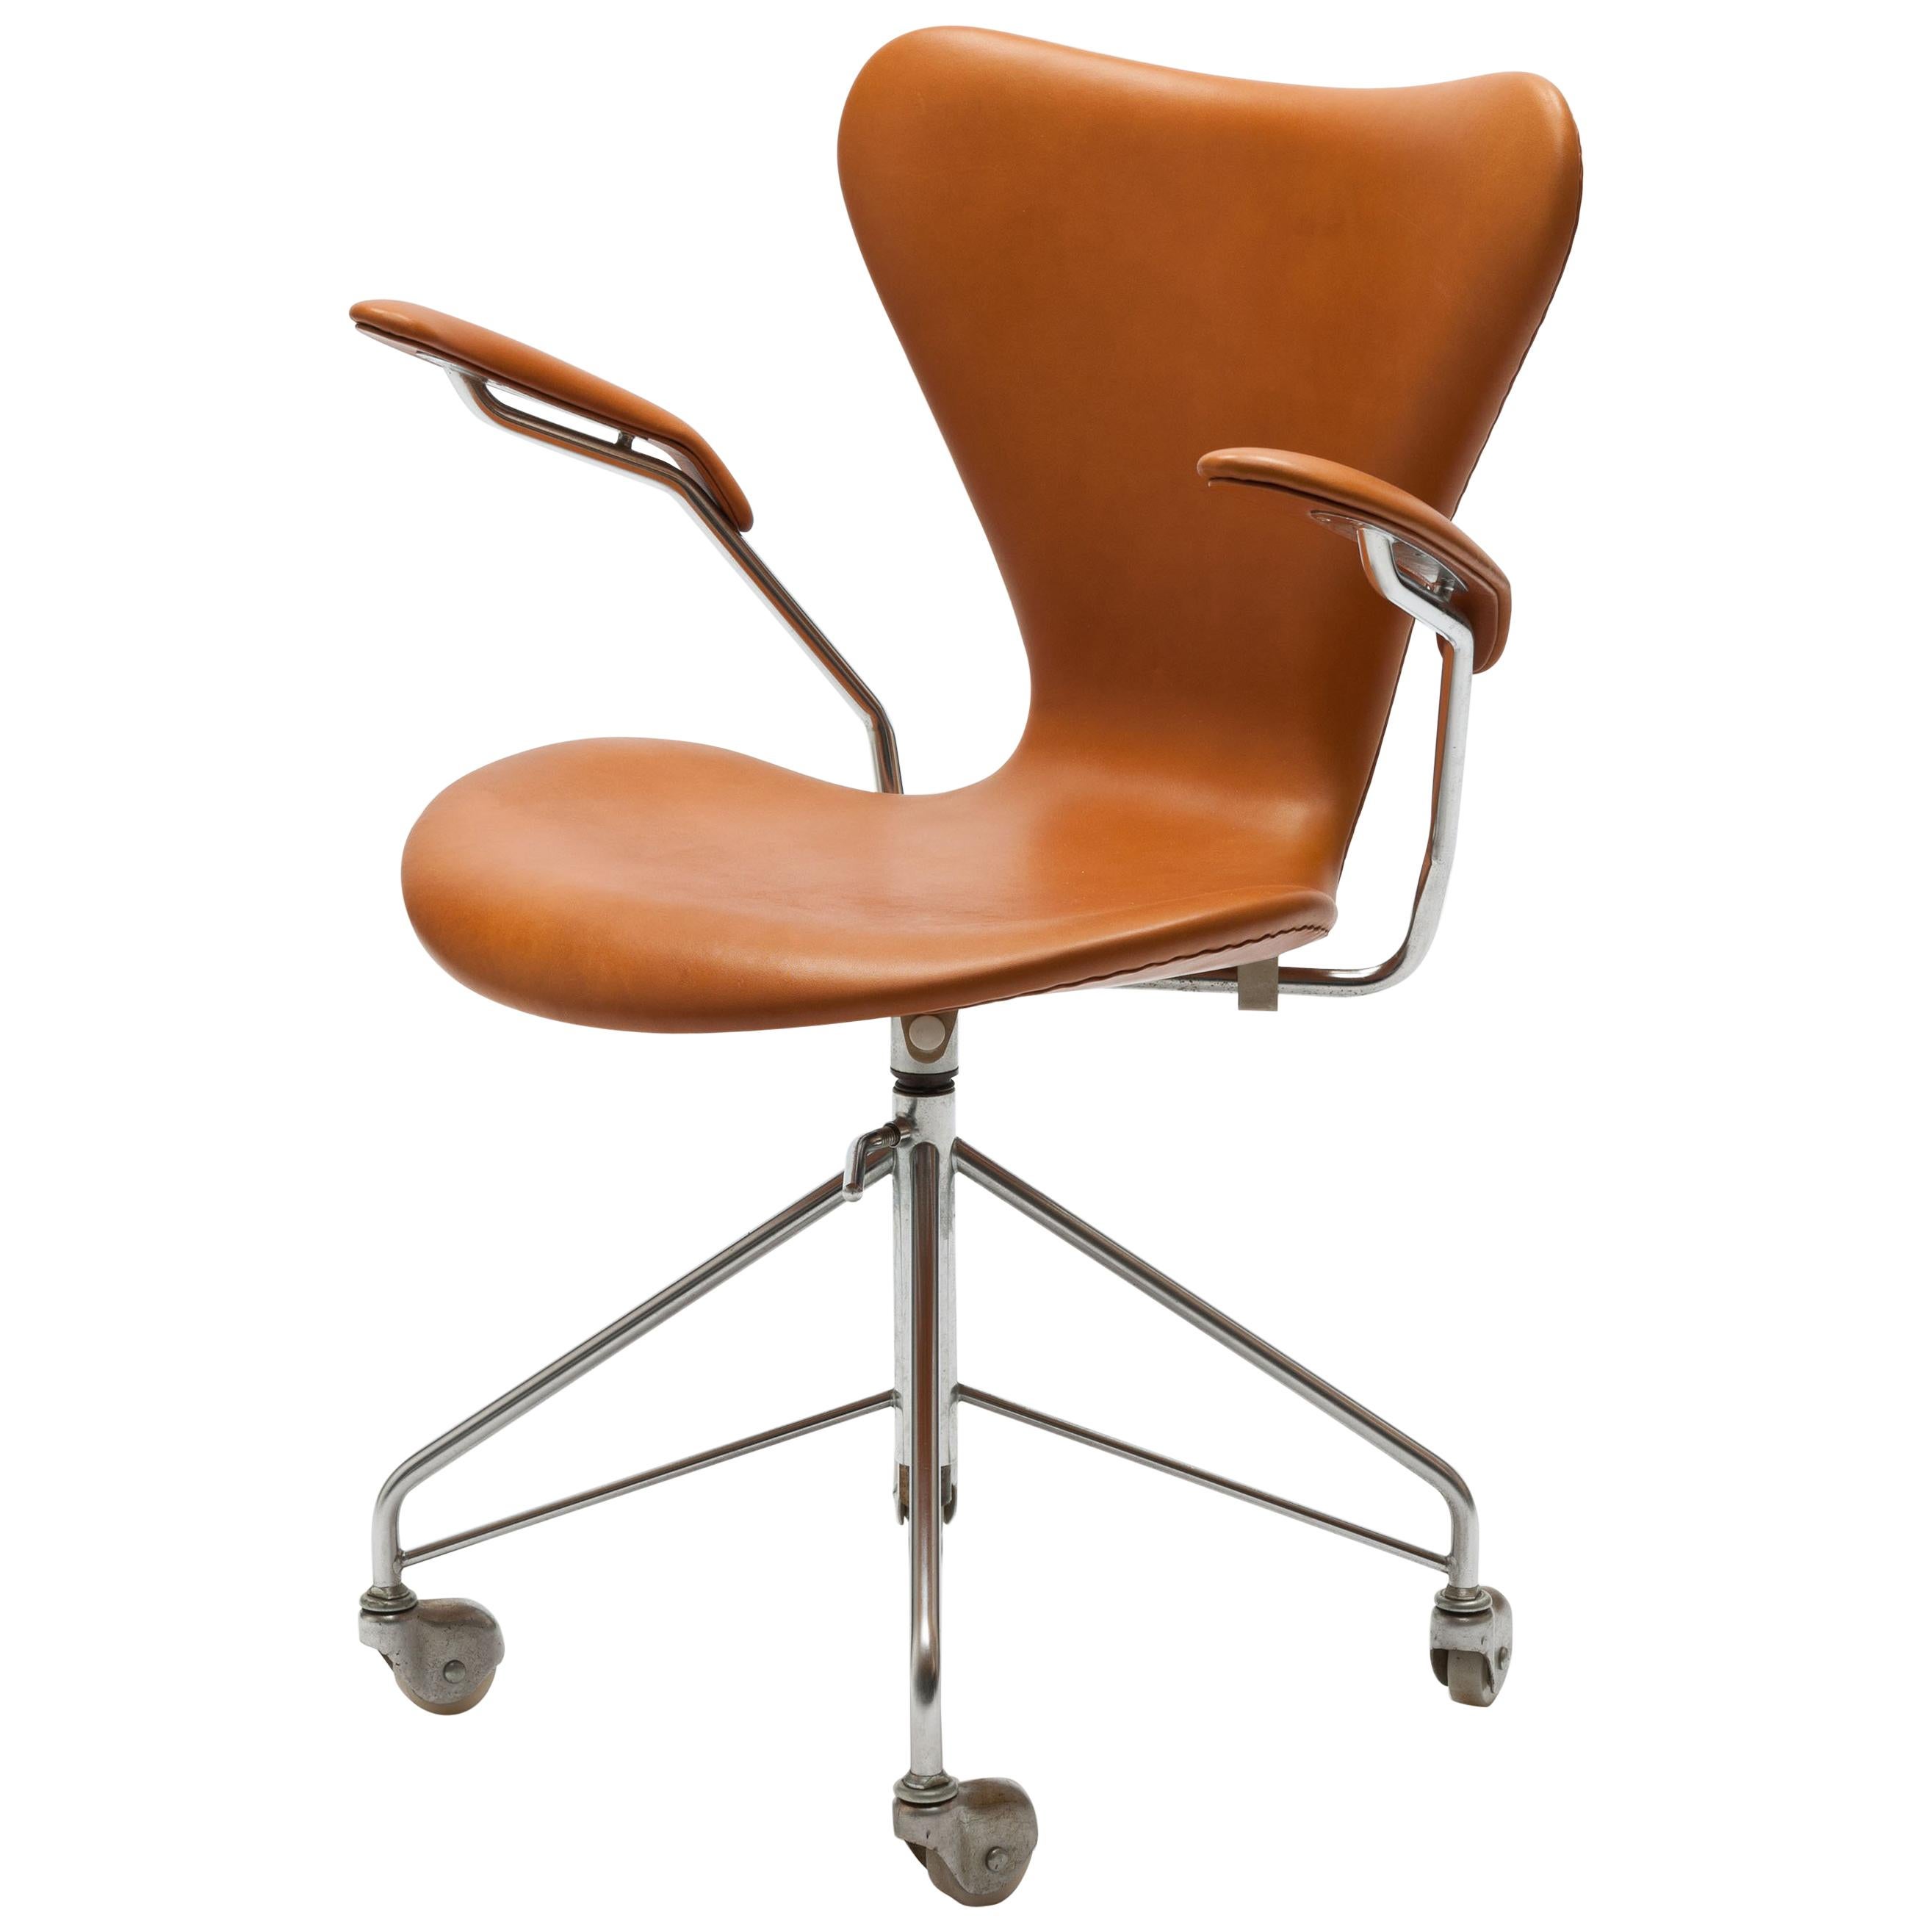 Arne Jacobsen swivel desk chair model 3217 office chair with armrests. Original, first series four-star swivel base with chromed steel feet on casters. Designed by Arne Jacobsen in 1955.
This chair dates from the early 1960s produced by Fritz